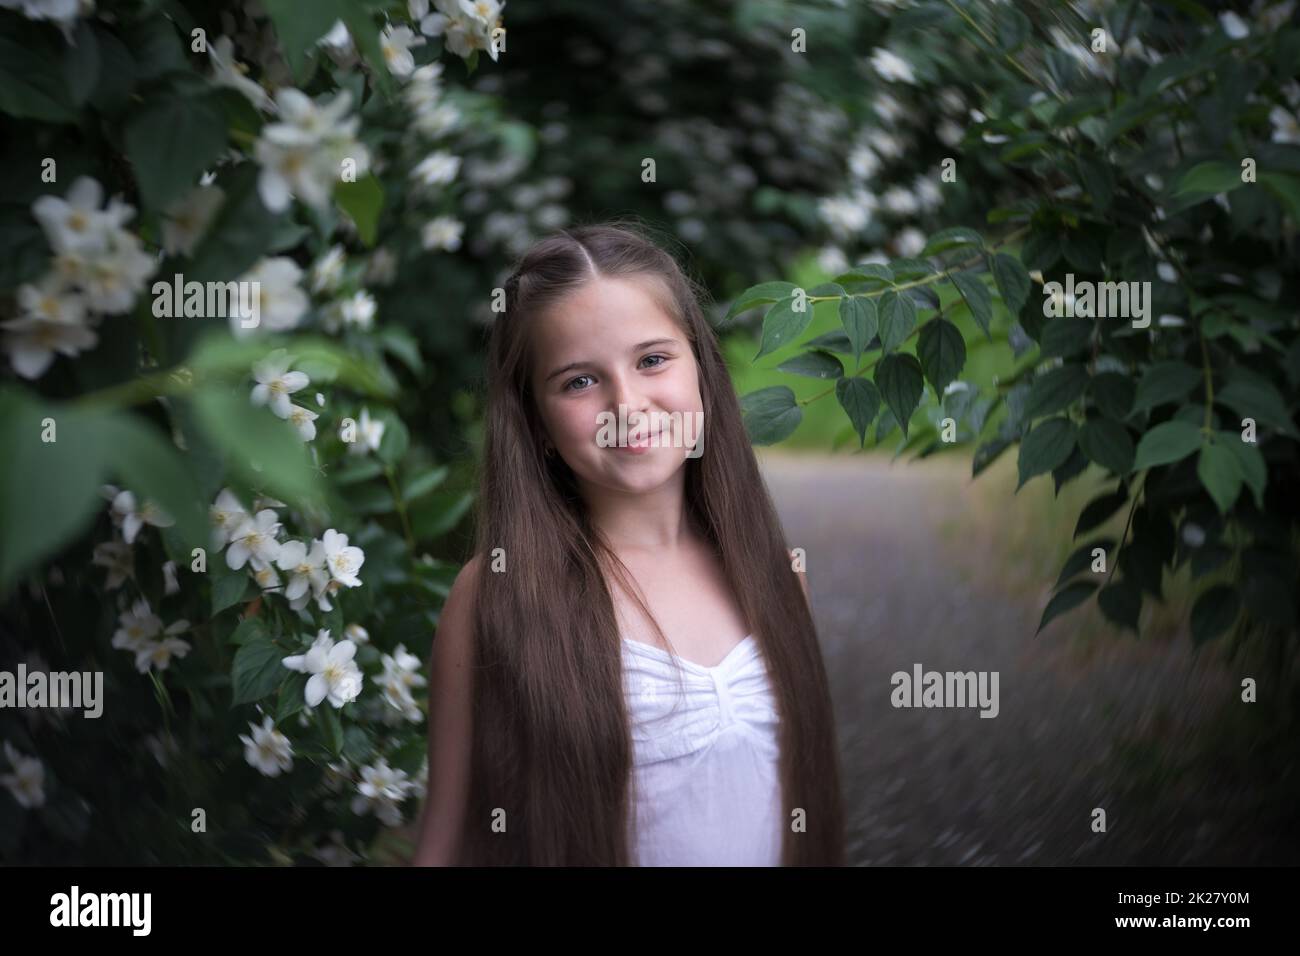 A beautiful girl with long hair stands in the flowering bushes of Philadelphus coronarius. Stock Photo